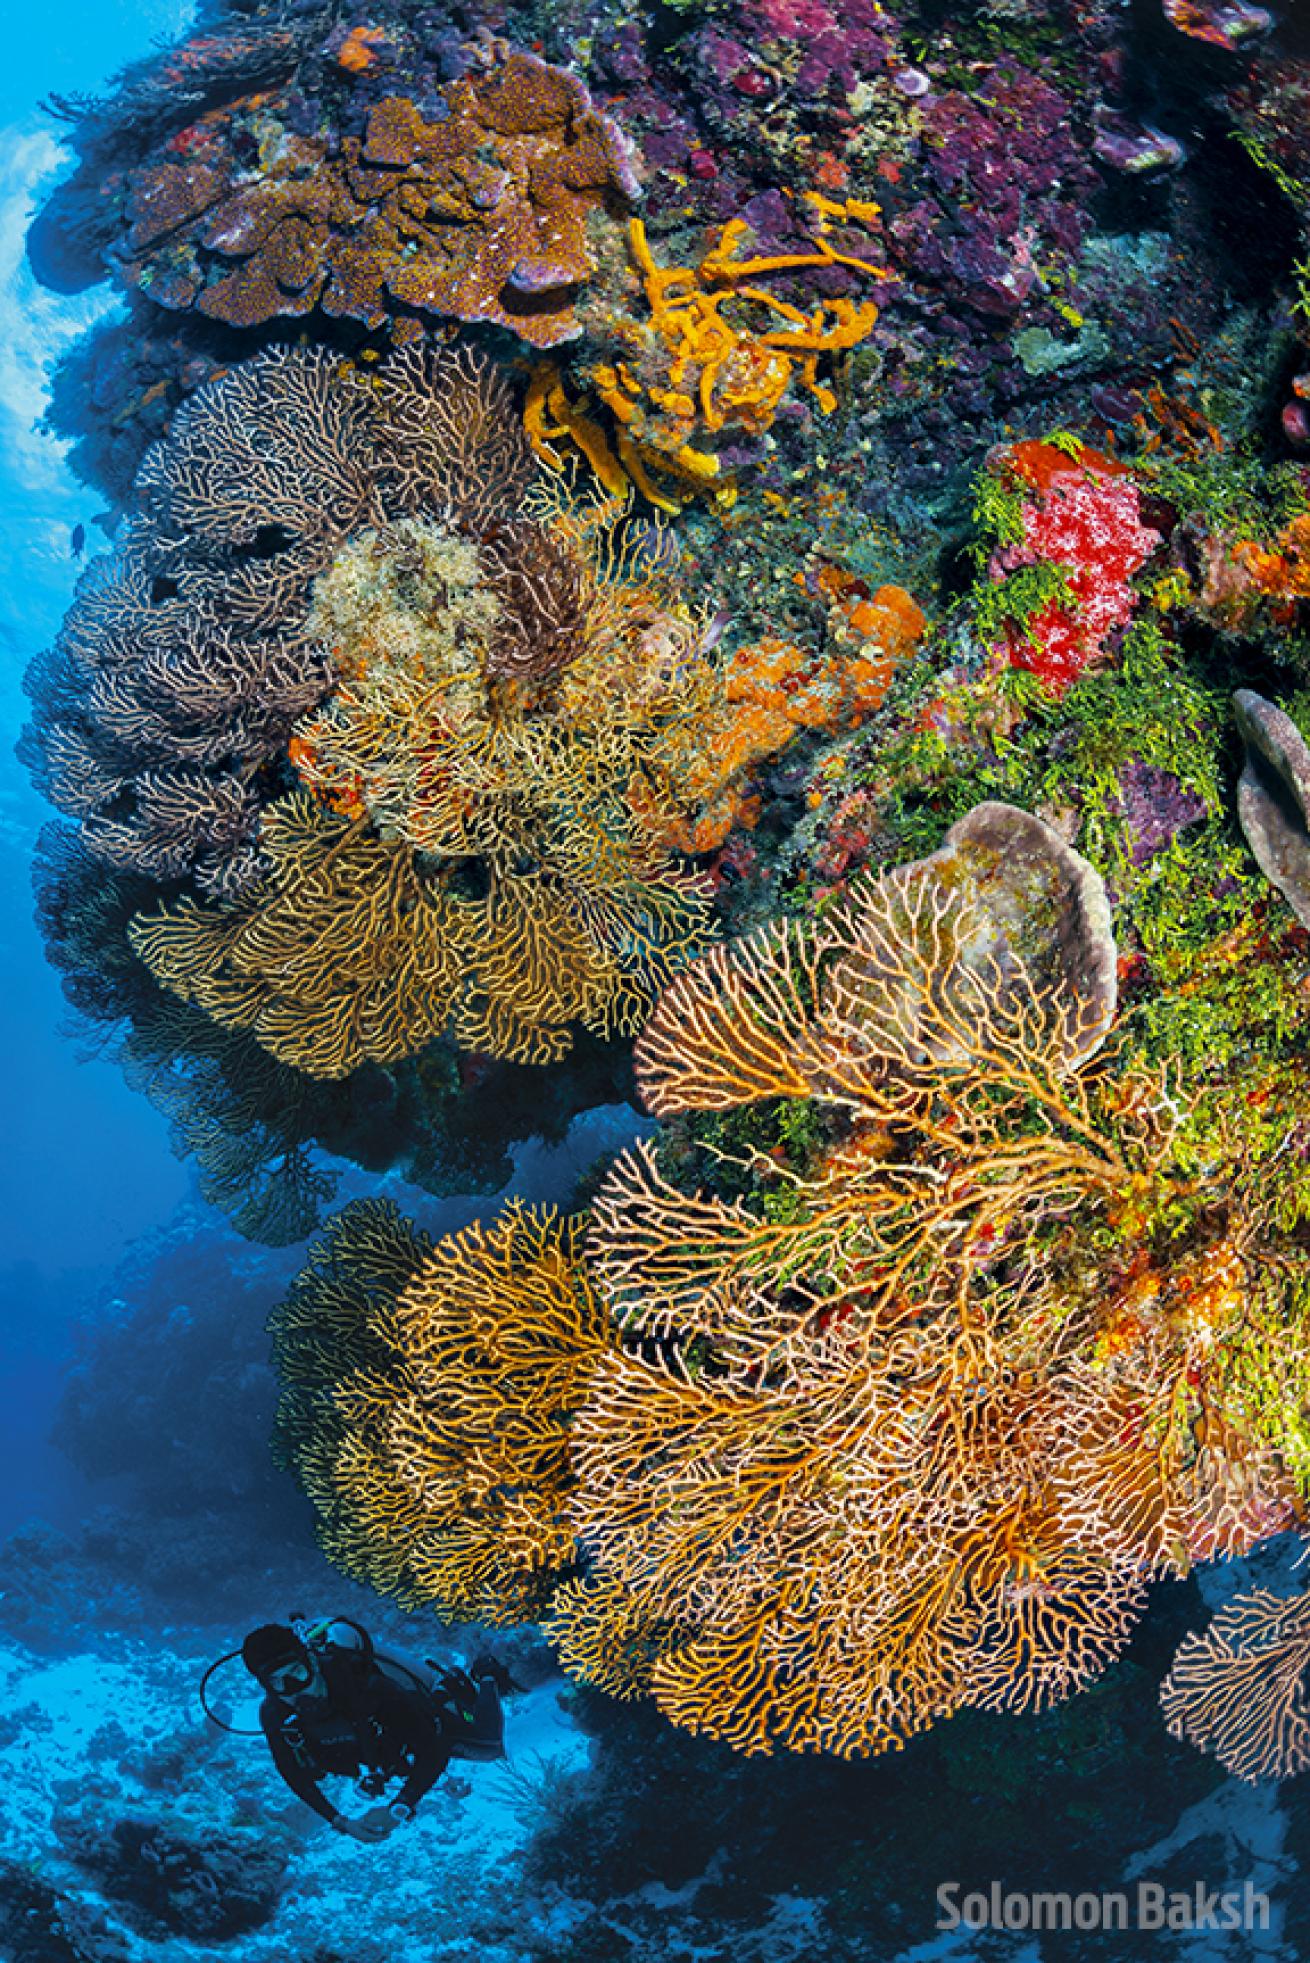 Diver and Gorgonian Coral Underwater In Cozumel